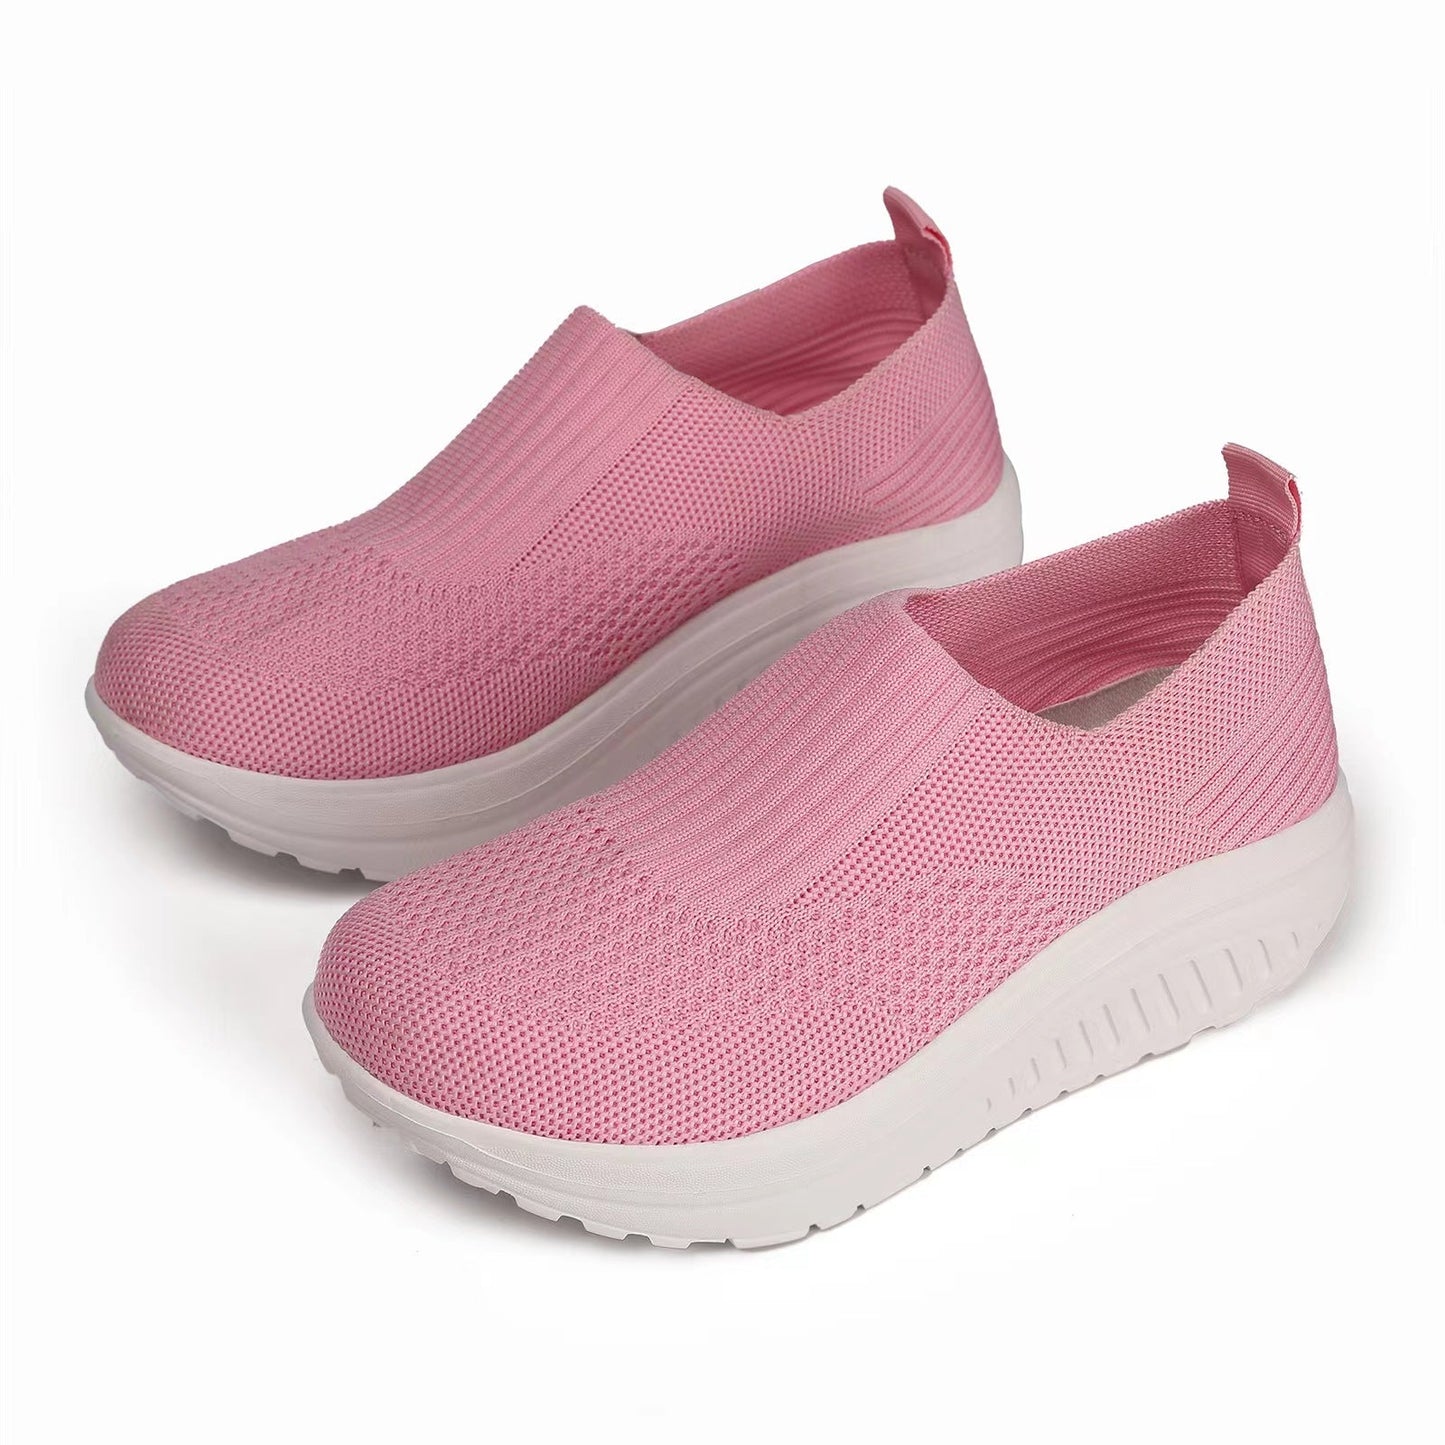 Ergonomic Pain Relief Arch Support Shoes